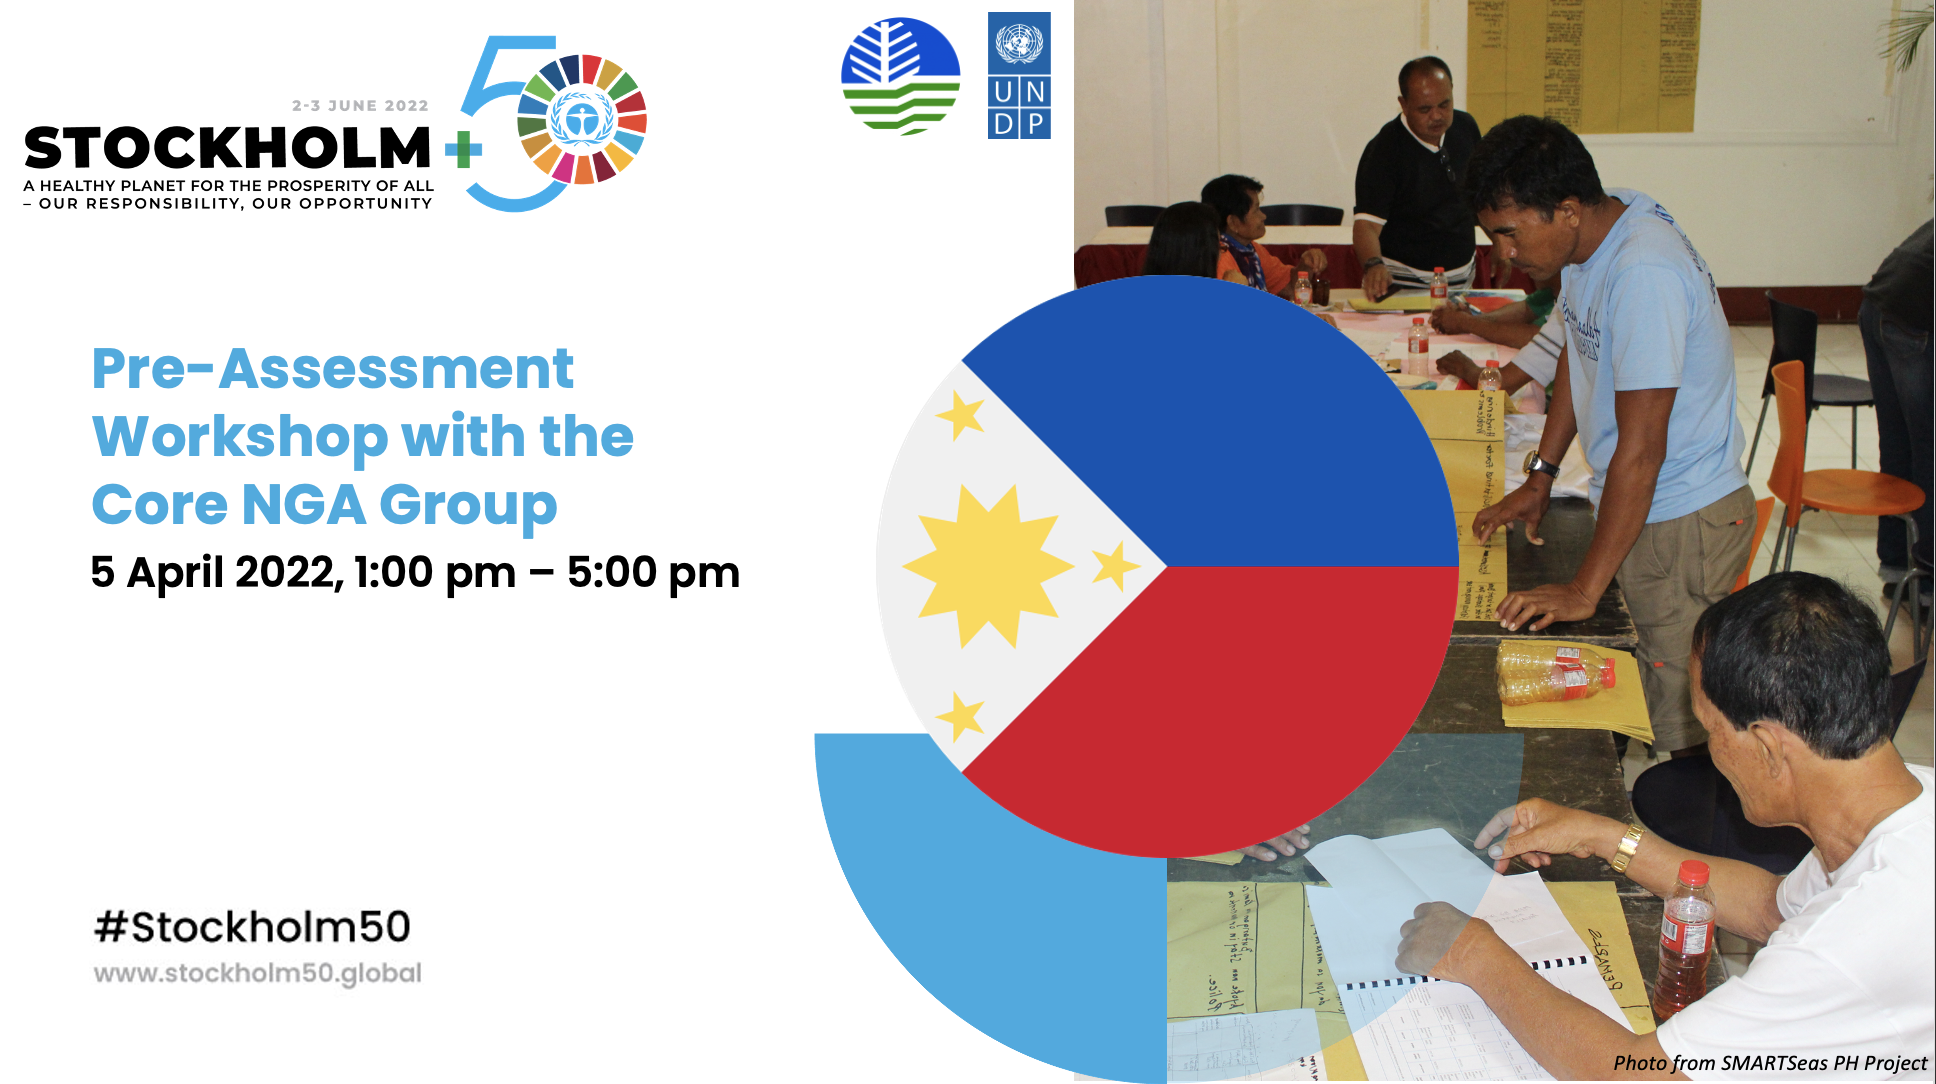 A Pre-Assessment Workshop will be beneficial for the following objectives: a) consolidate Philippine milestones from 1972 until the latest international convention/ conference; b) identify and agree on the focus thematic areas for the national consultations; and c) discuss the S+50 Leadership Dialogue questions.   To ensure these objectives are met, other sectoral Government Agencies including the Department of Foreign Affairs, Department of Energy, Department of Transportation and Department of Agriculture were also invited on top of the key line agencies.